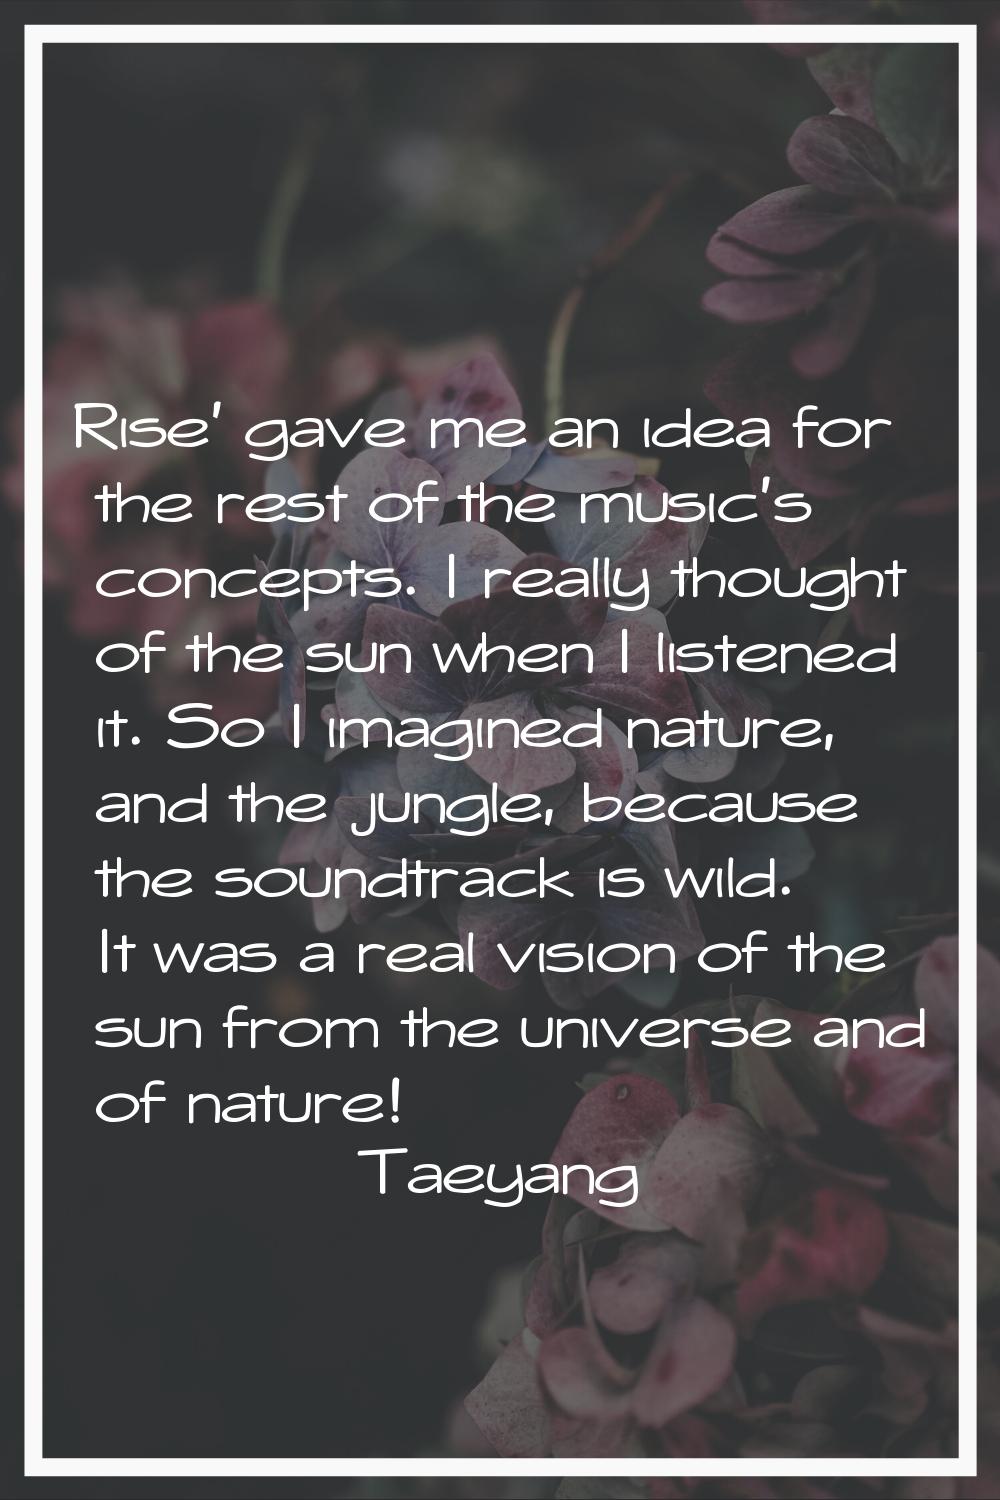 Rise' gave me an idea for the rest of the music's concepts. I really thought of the sun when I list